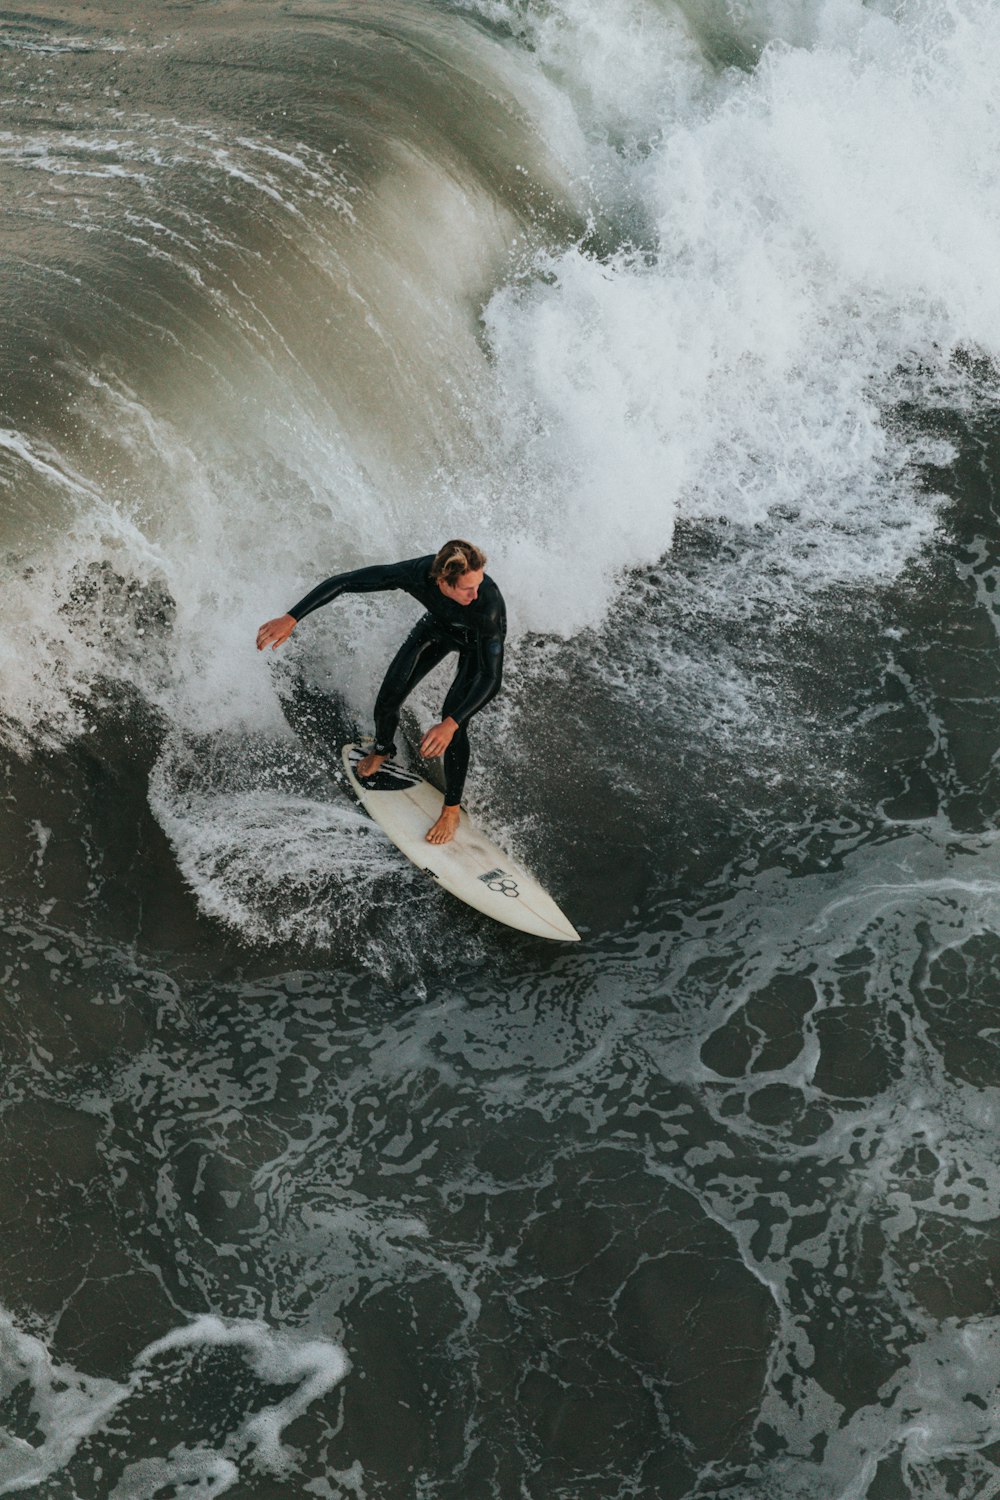 man in black wetsuit surfing on water waves during daytime